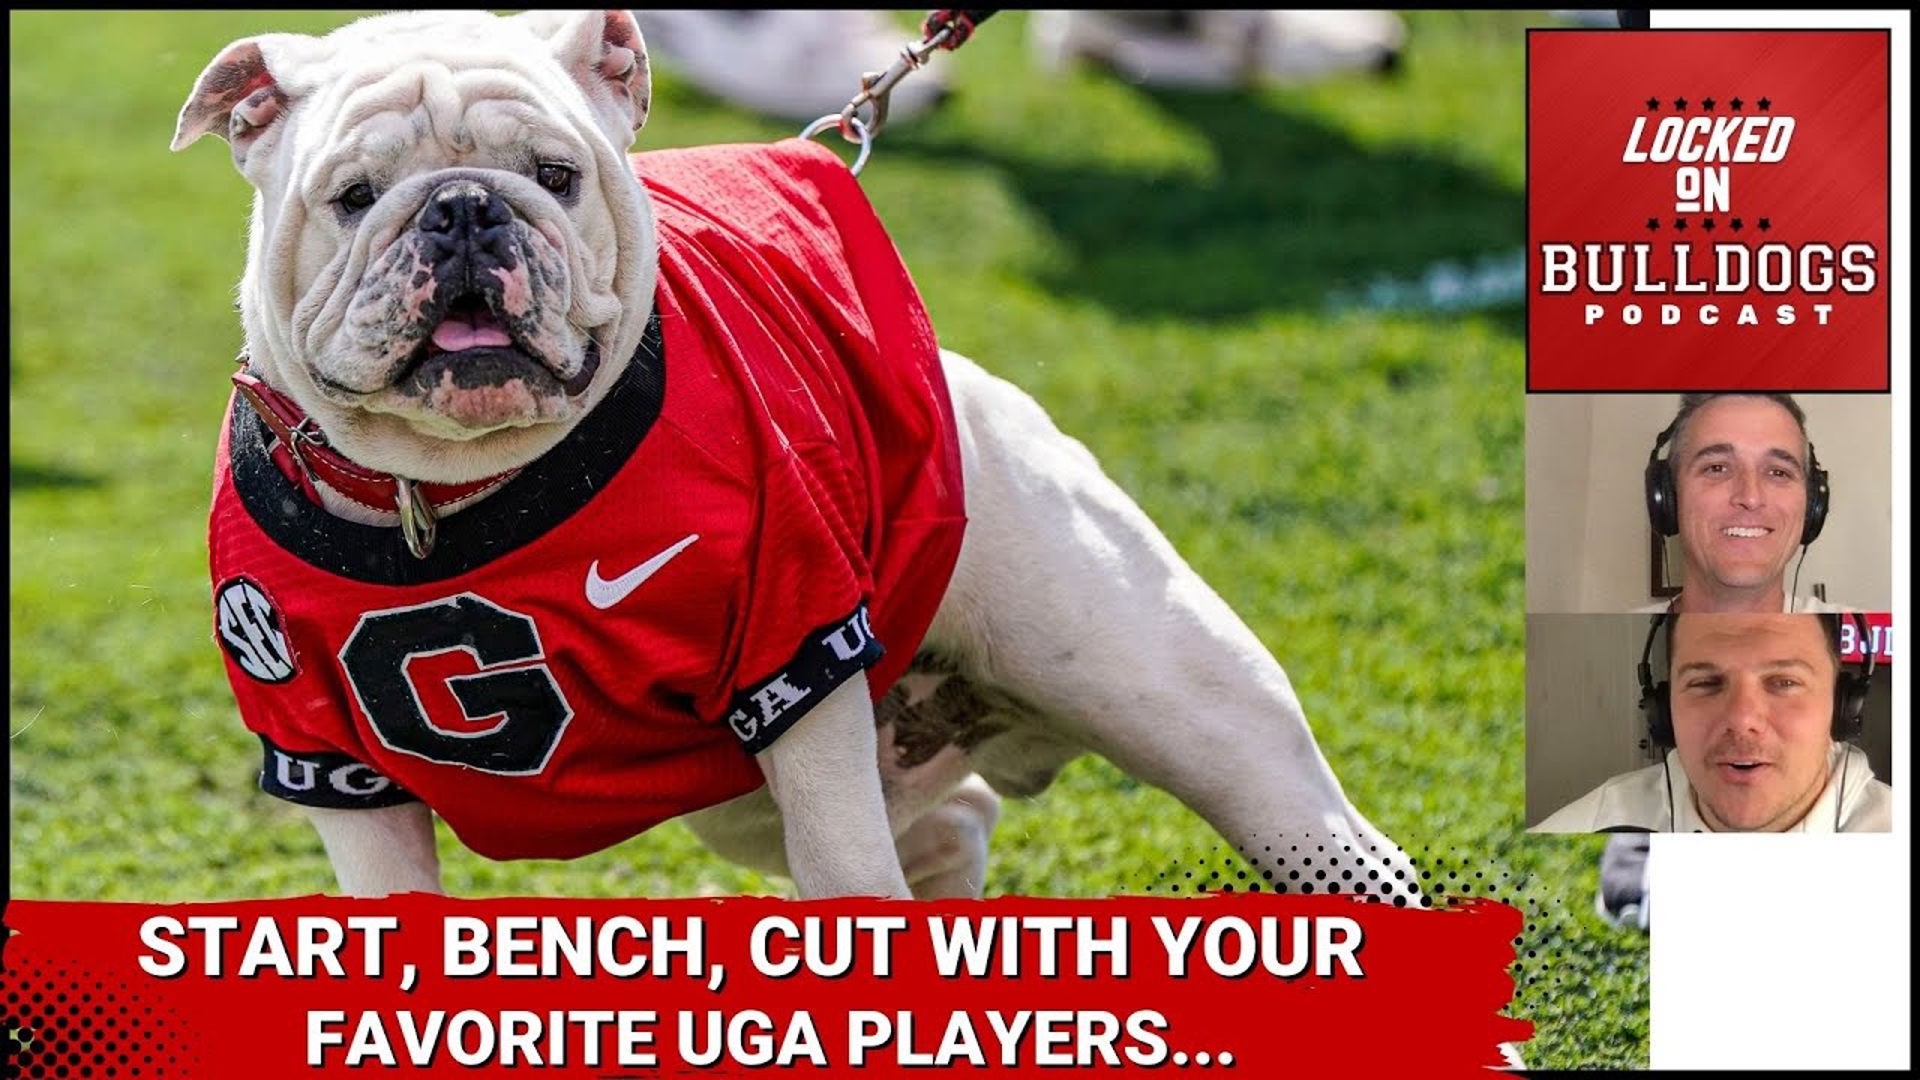 Georgia Football has so many indispensable players...but who would you cut if you had to??